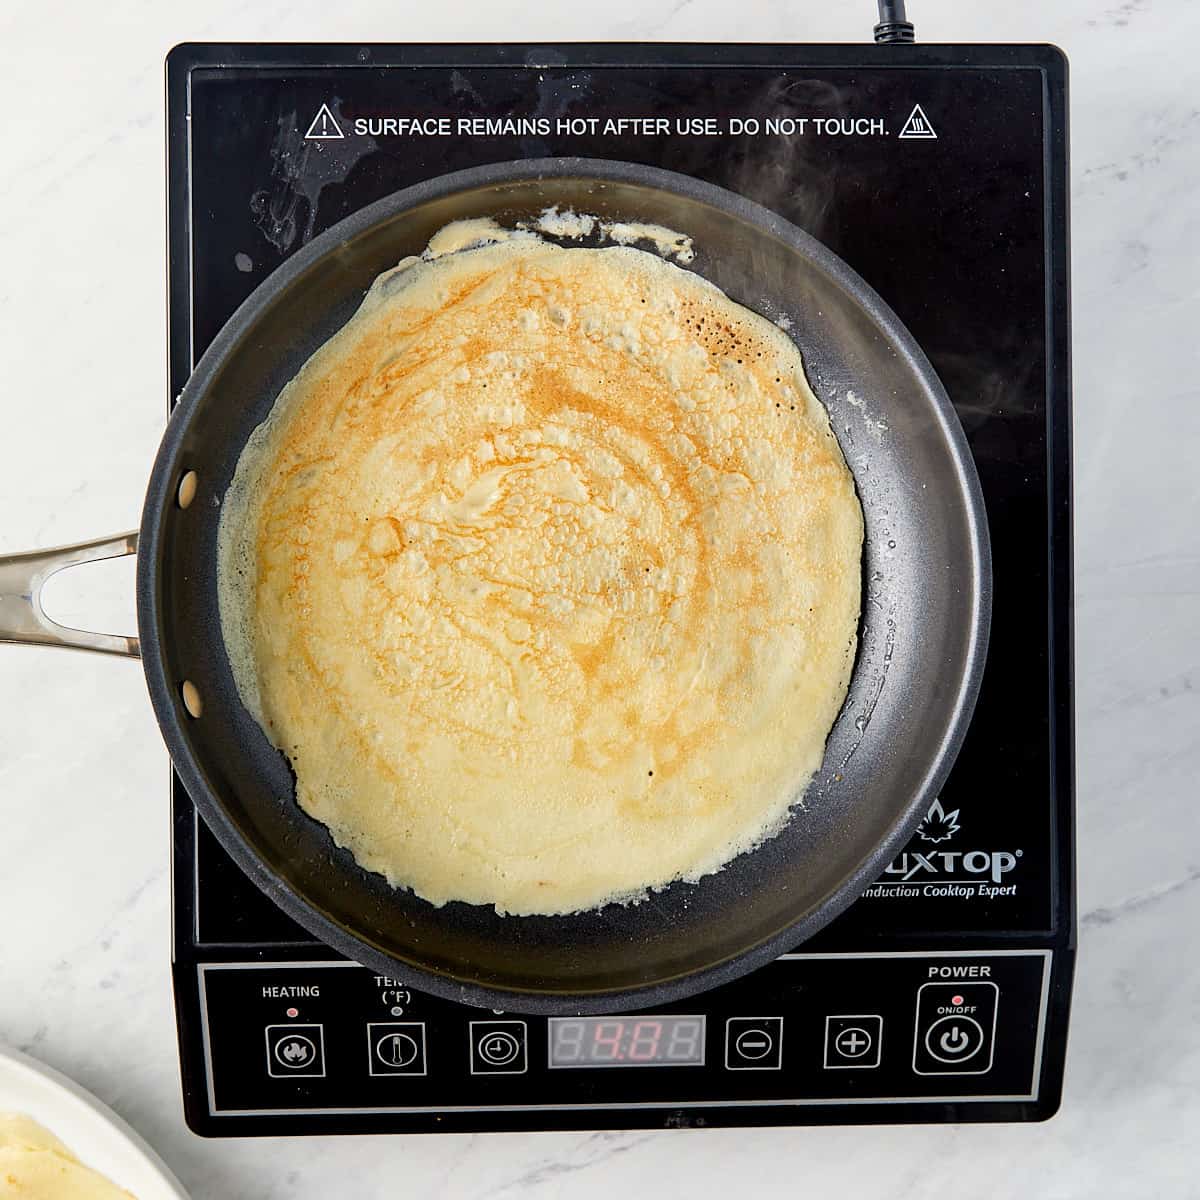 crepe being cooked in a pan on a cooktop